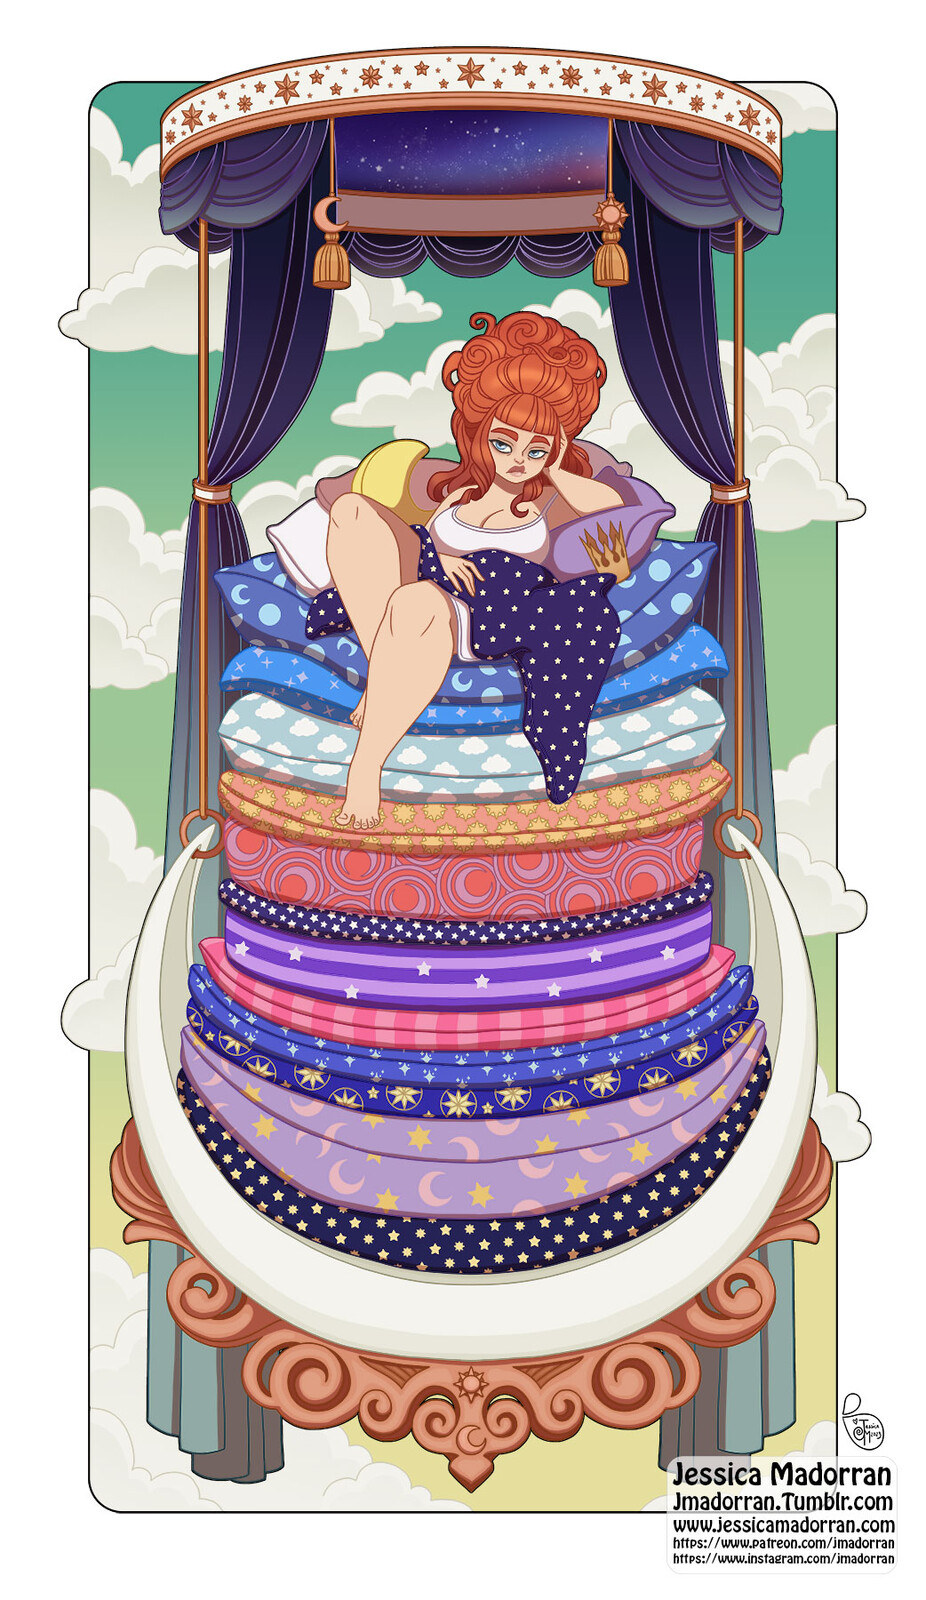 March 2023 Patreon - Twisted Princess and the Pea